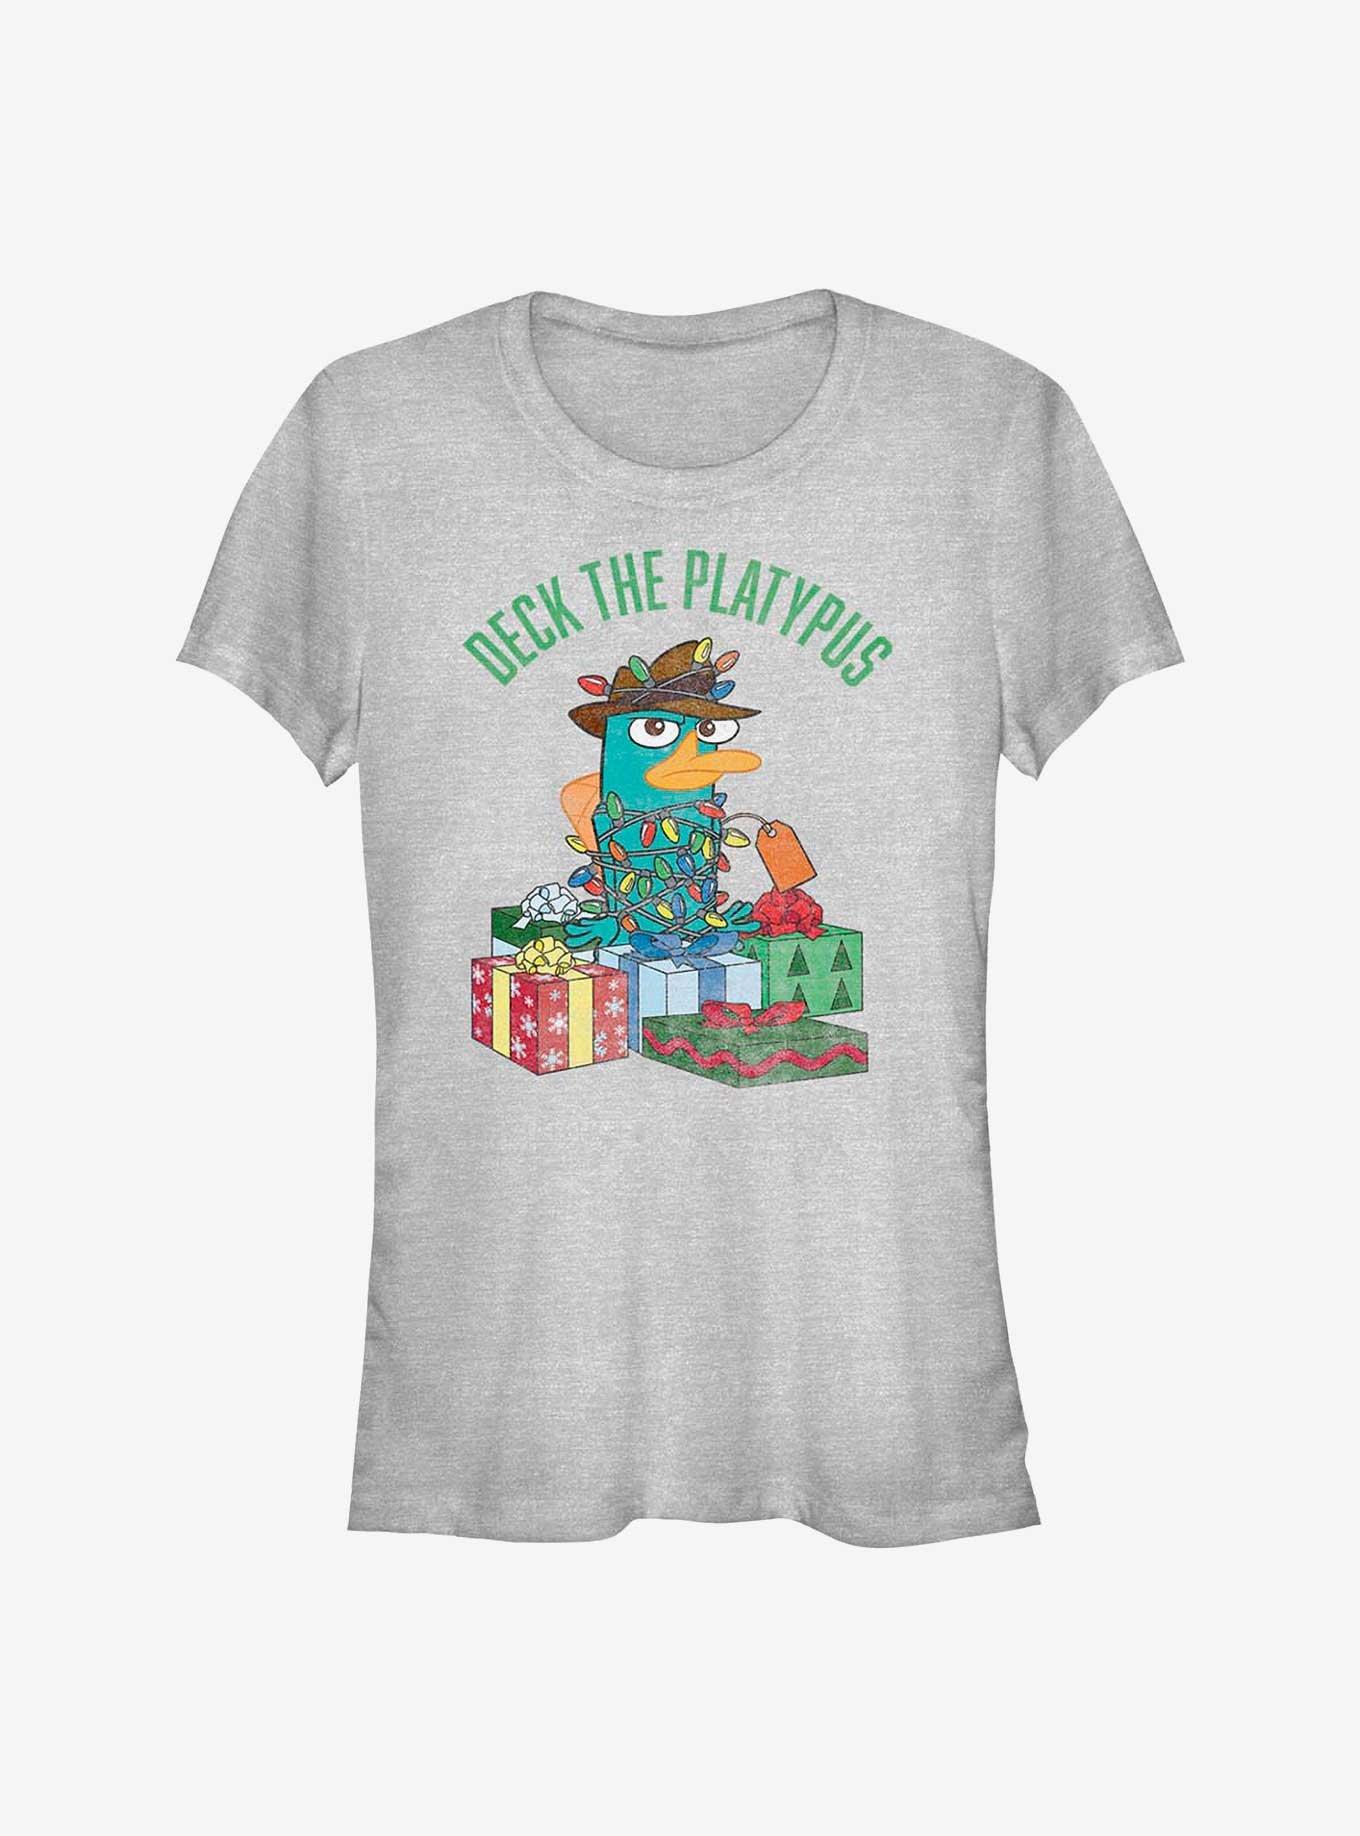 Disney Phineas And Ferb Wrapped Up Perry Girls T-Shirt